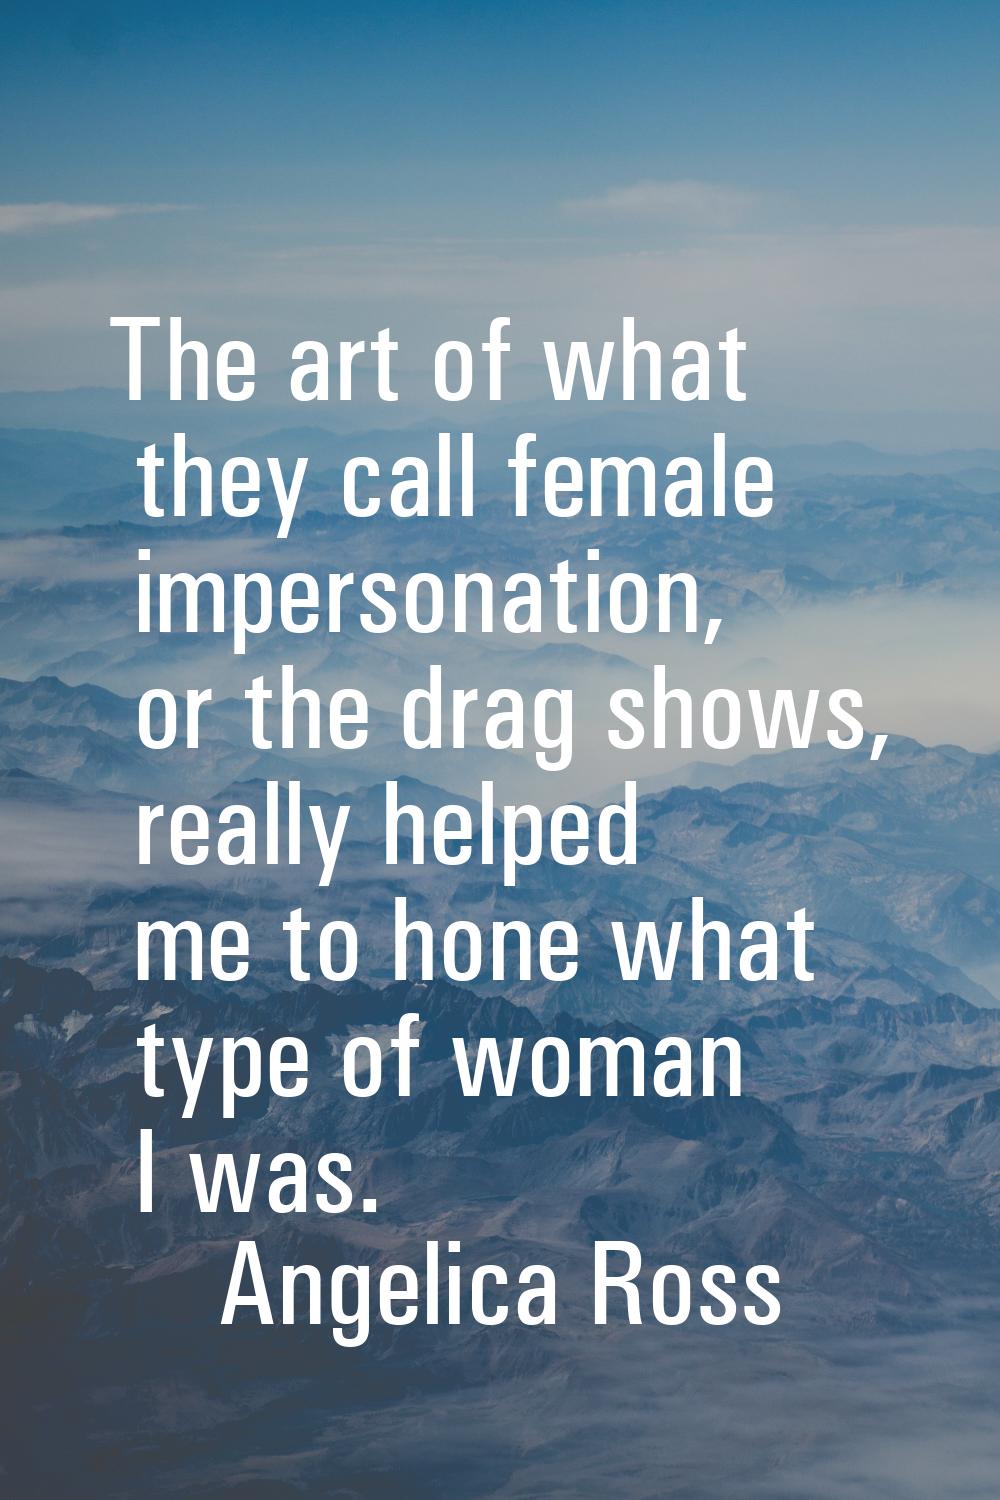 The art of what they call female impersonation, or the drag shows, really helped me to hone what ty